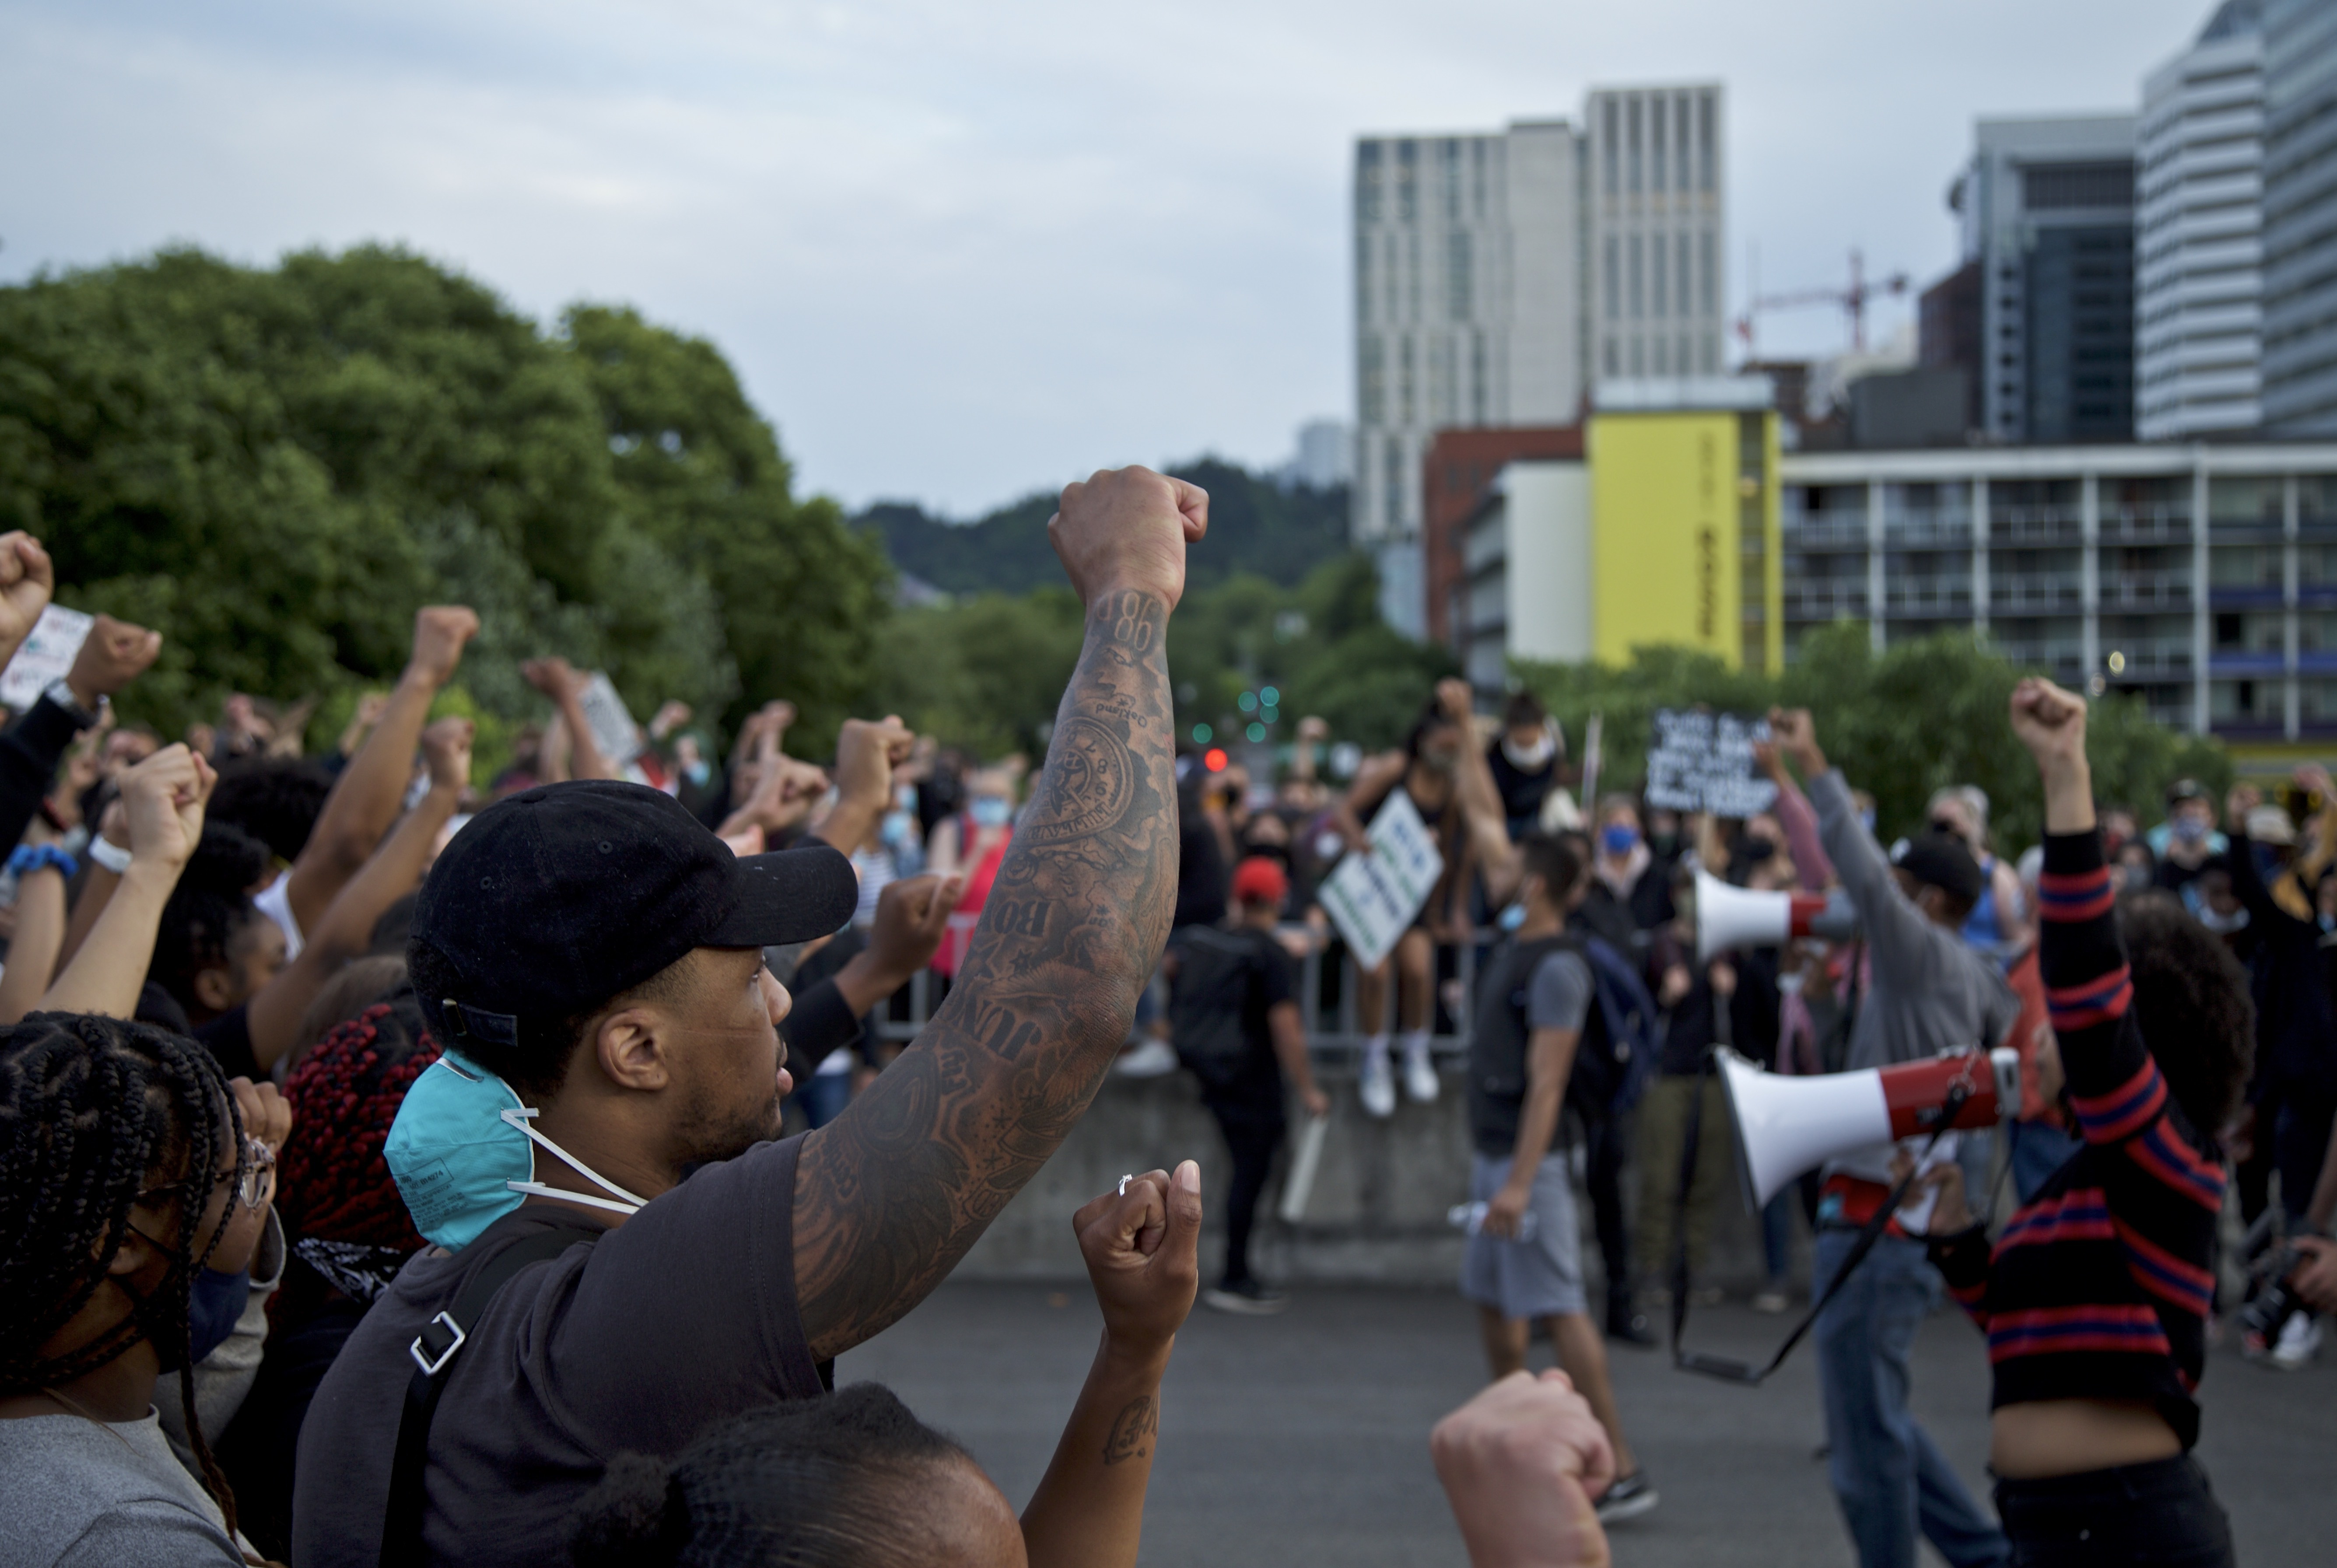 Portland Trail Blazers' Damian Lillard, left, joins other demonstrators in Portland, Ore., during a protest against police brutality and racism, sparked by the death of George Floyd, who died May 25 after being restrained by police in Minneapolis. (AP Photo/Craig Mitchelldyer)